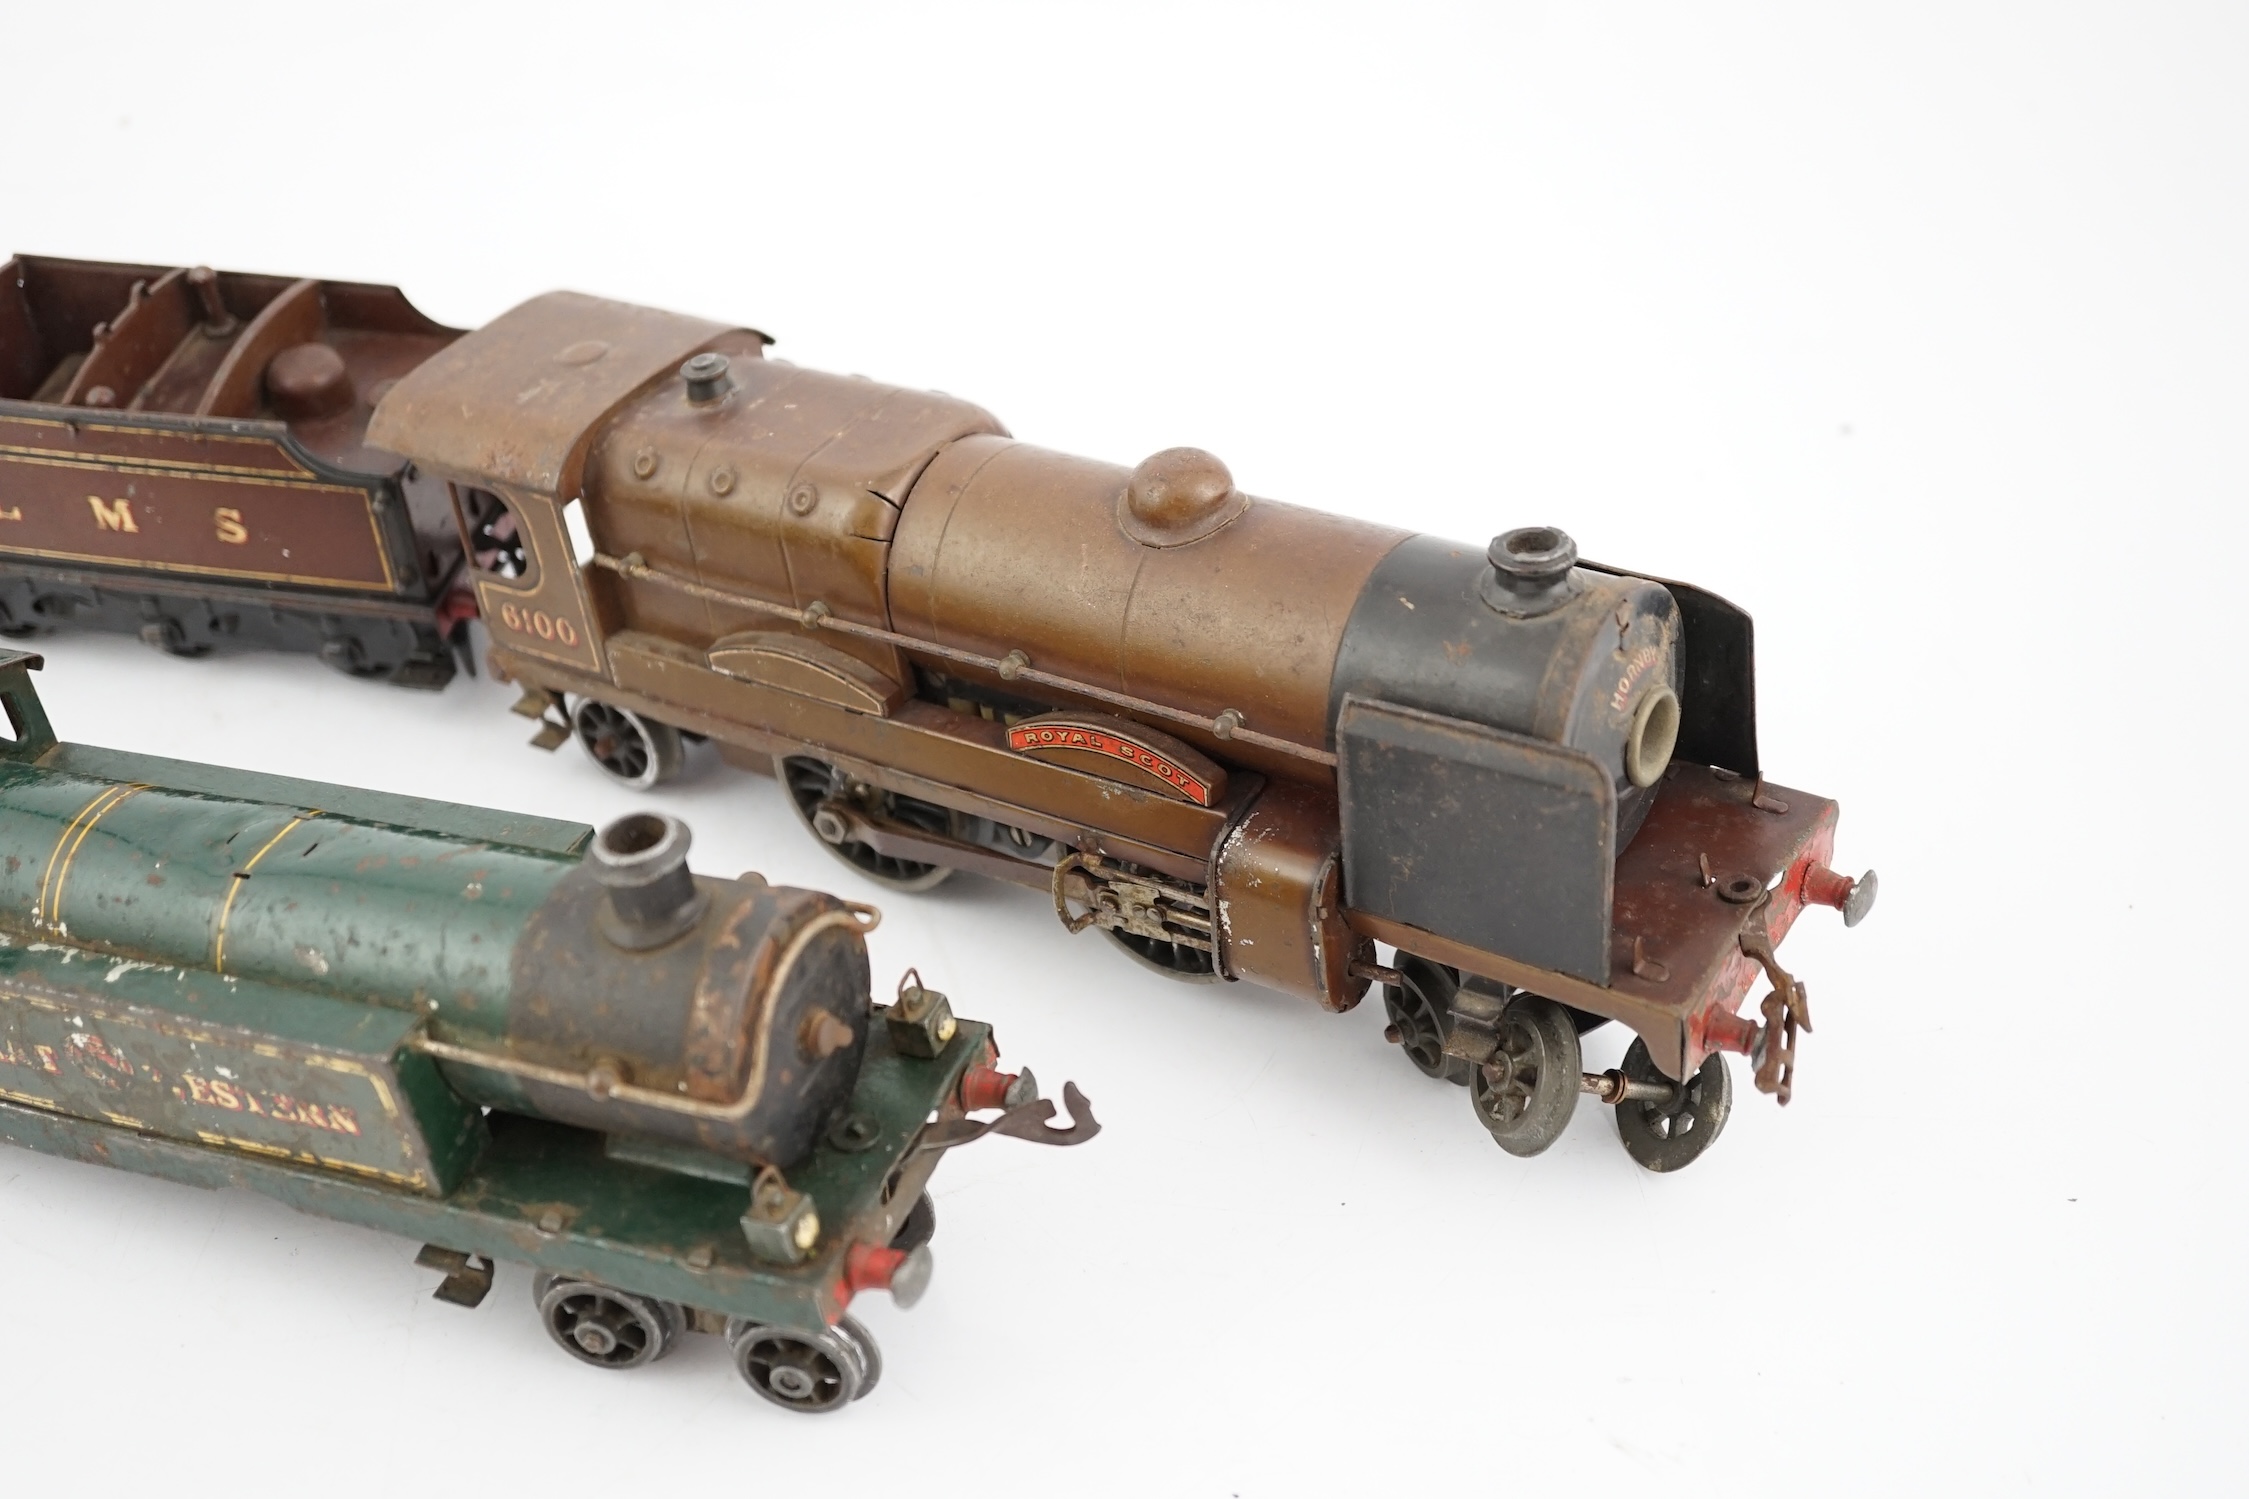 Two Hornby Series 0 gauge tinplate locomotives for 3-rail running; an LMS 4-4-2, Royal Scot 6100, and a Great Western 4-4-4T, 2243 (a.f.)